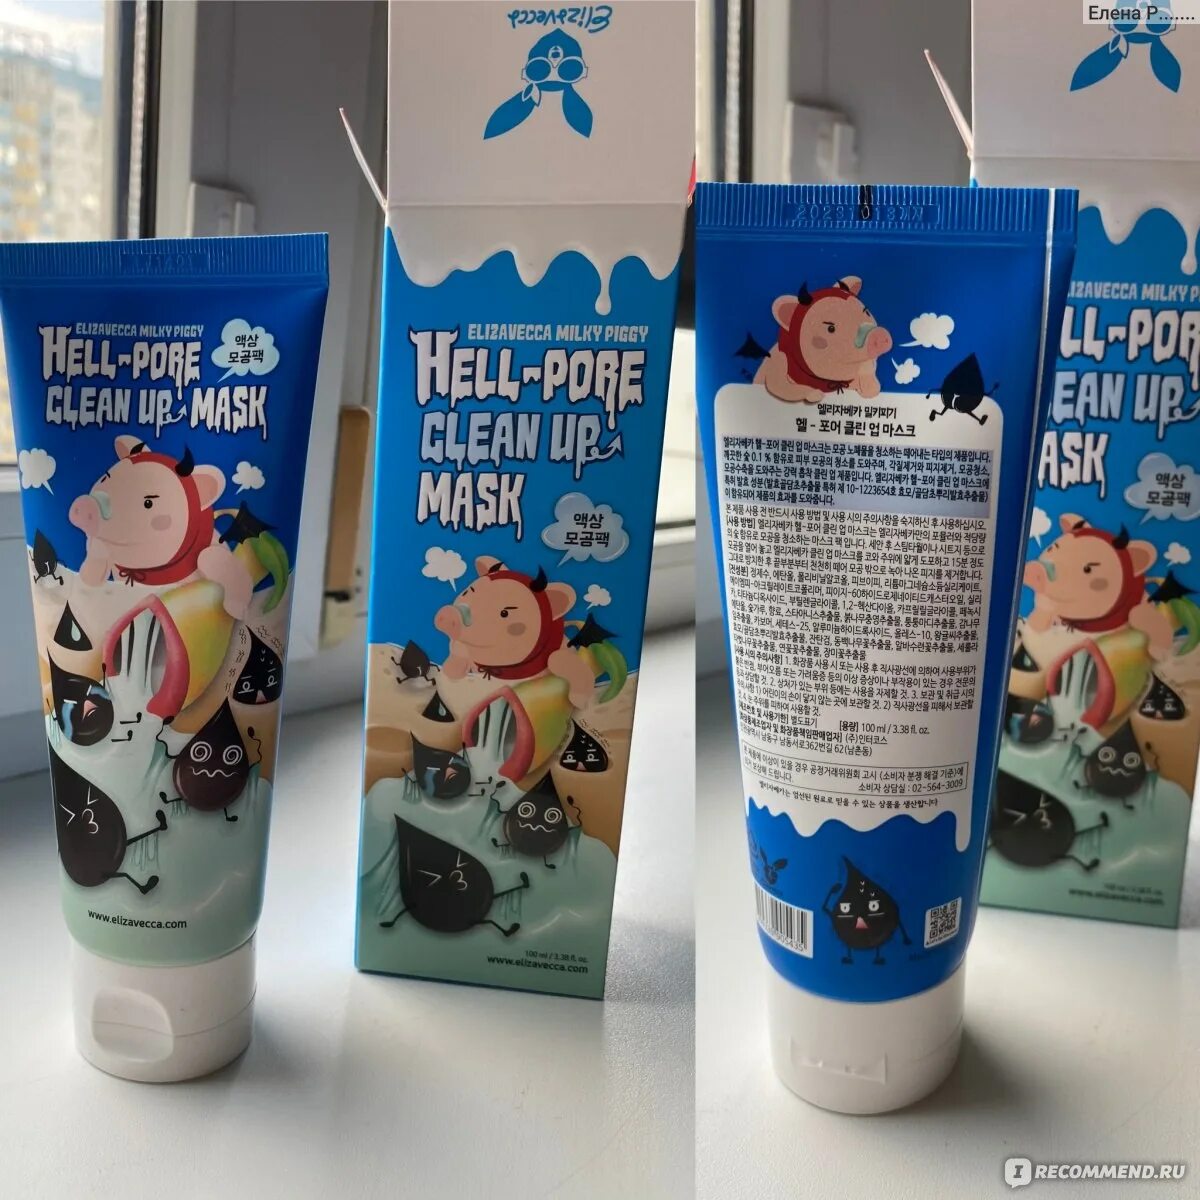 Hell Pore clean up Mask. Milky Piggy Elastic Pore Cleansing Foam PNG. Milky piggy hell pore clean up